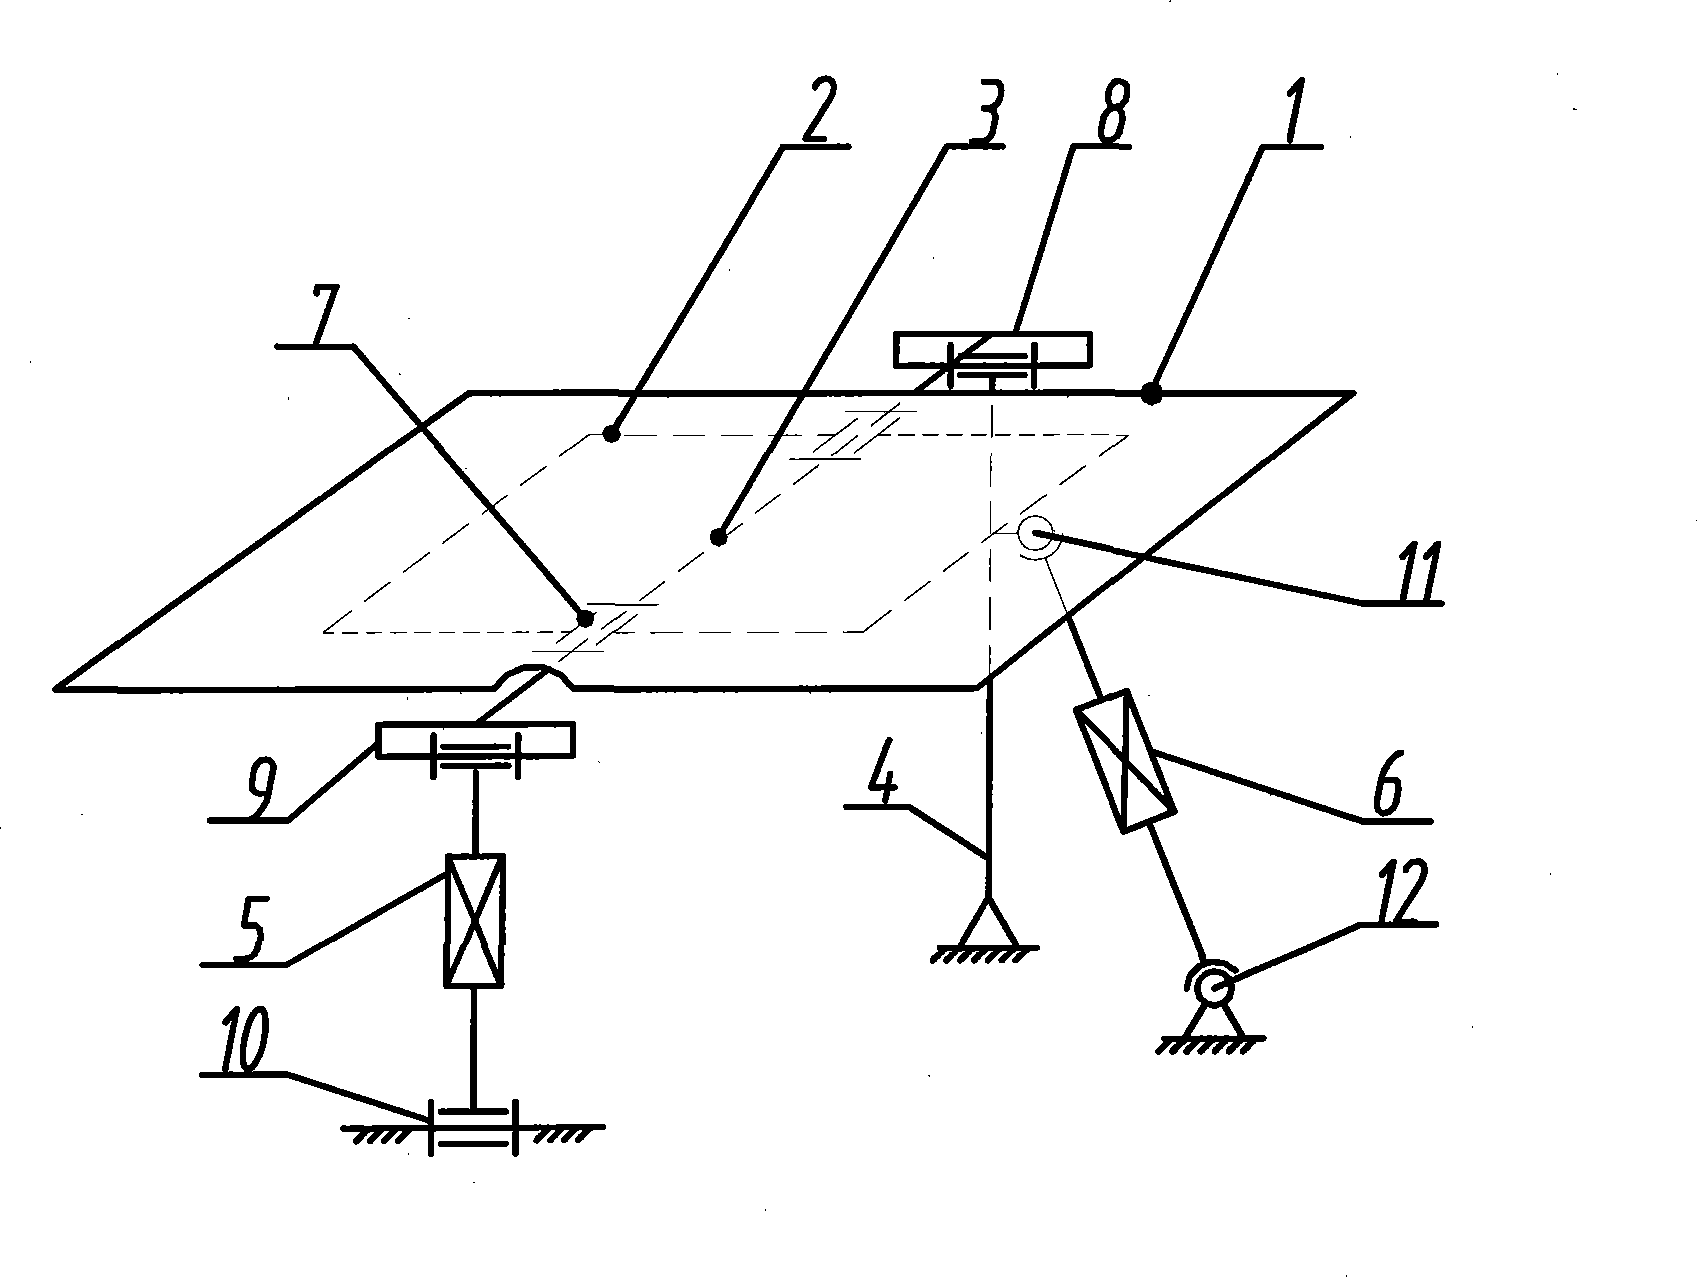 Parallel type solar two-axis tracing mechanism